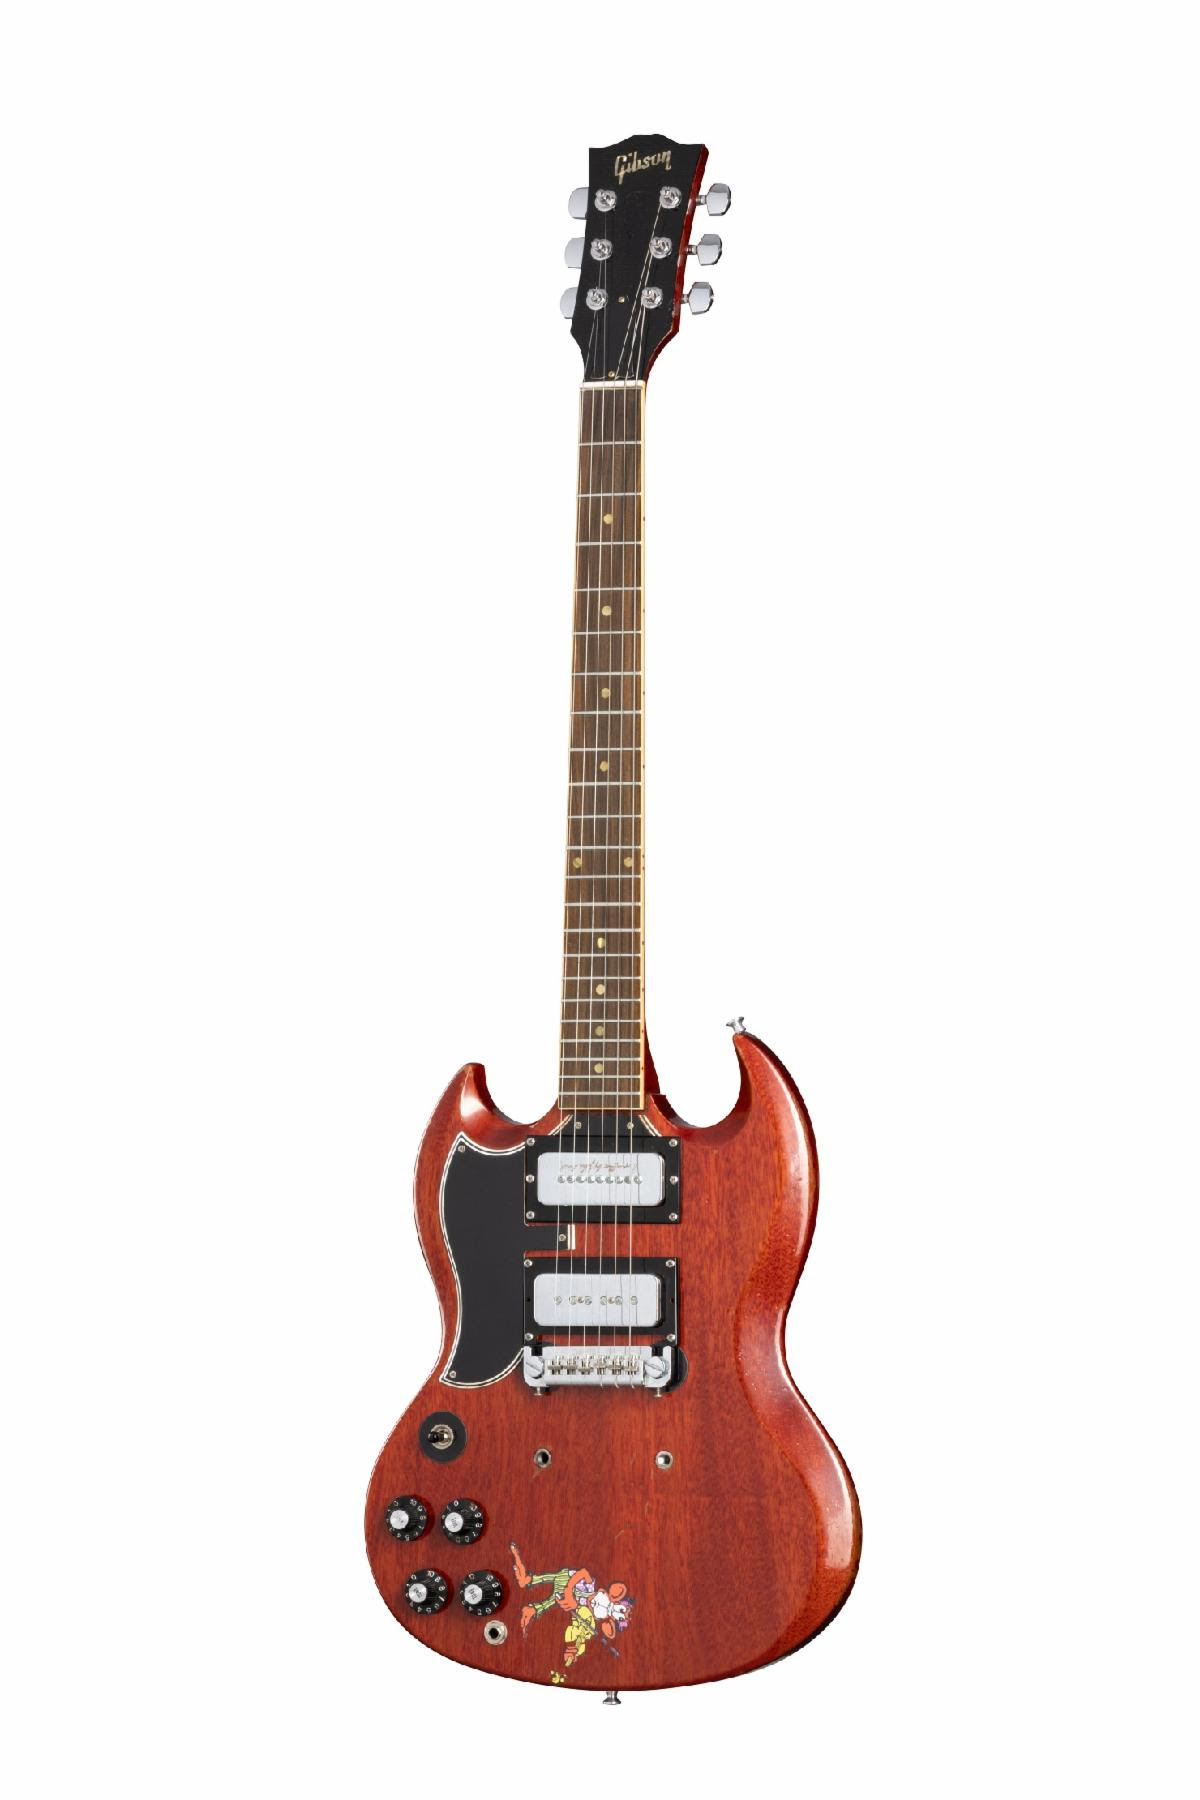 Rally Partners With Gibson To Offer Iconic Guitars As An Investment